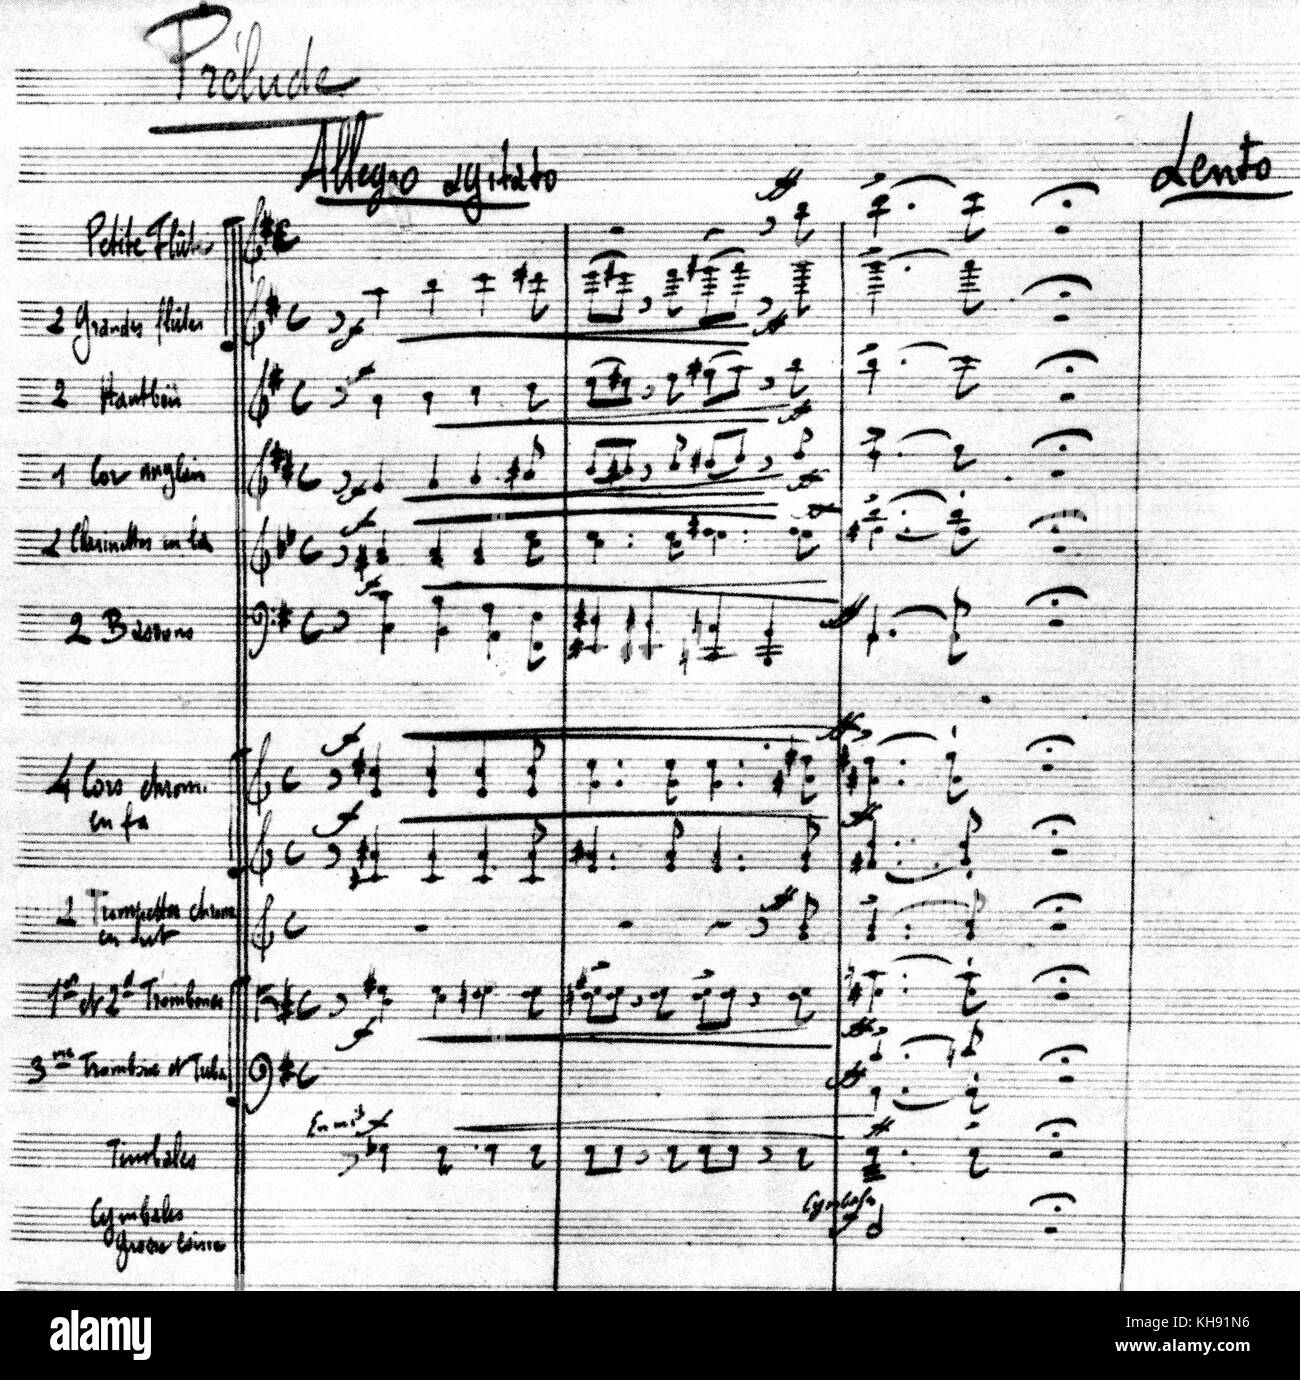 Maurice Ravel - Fragment (for wind and percussion) from prelude cantata  'Alcyone', 1902. Ravel 's entry for his second unsuccessful attempt at the Prix de Rome. Signed by composer. MR; French composer, 17 March 1875 - 28 December 1937. Stock Photo